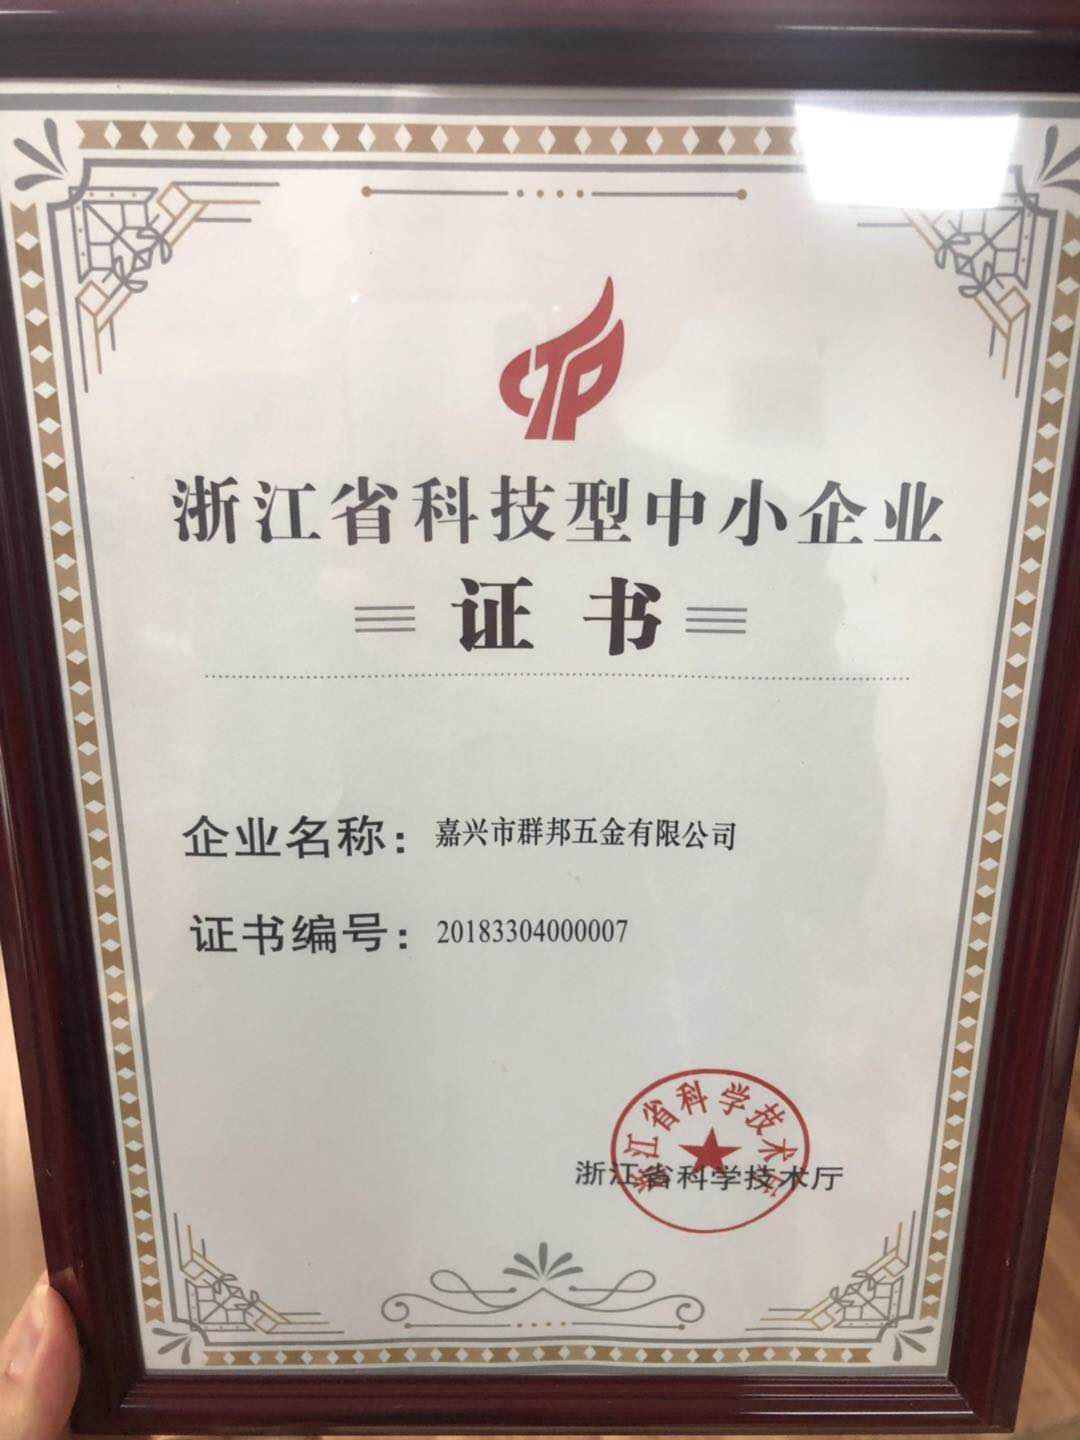 Zhejiang Province Science and technology small and medium-sized enterprise certificate